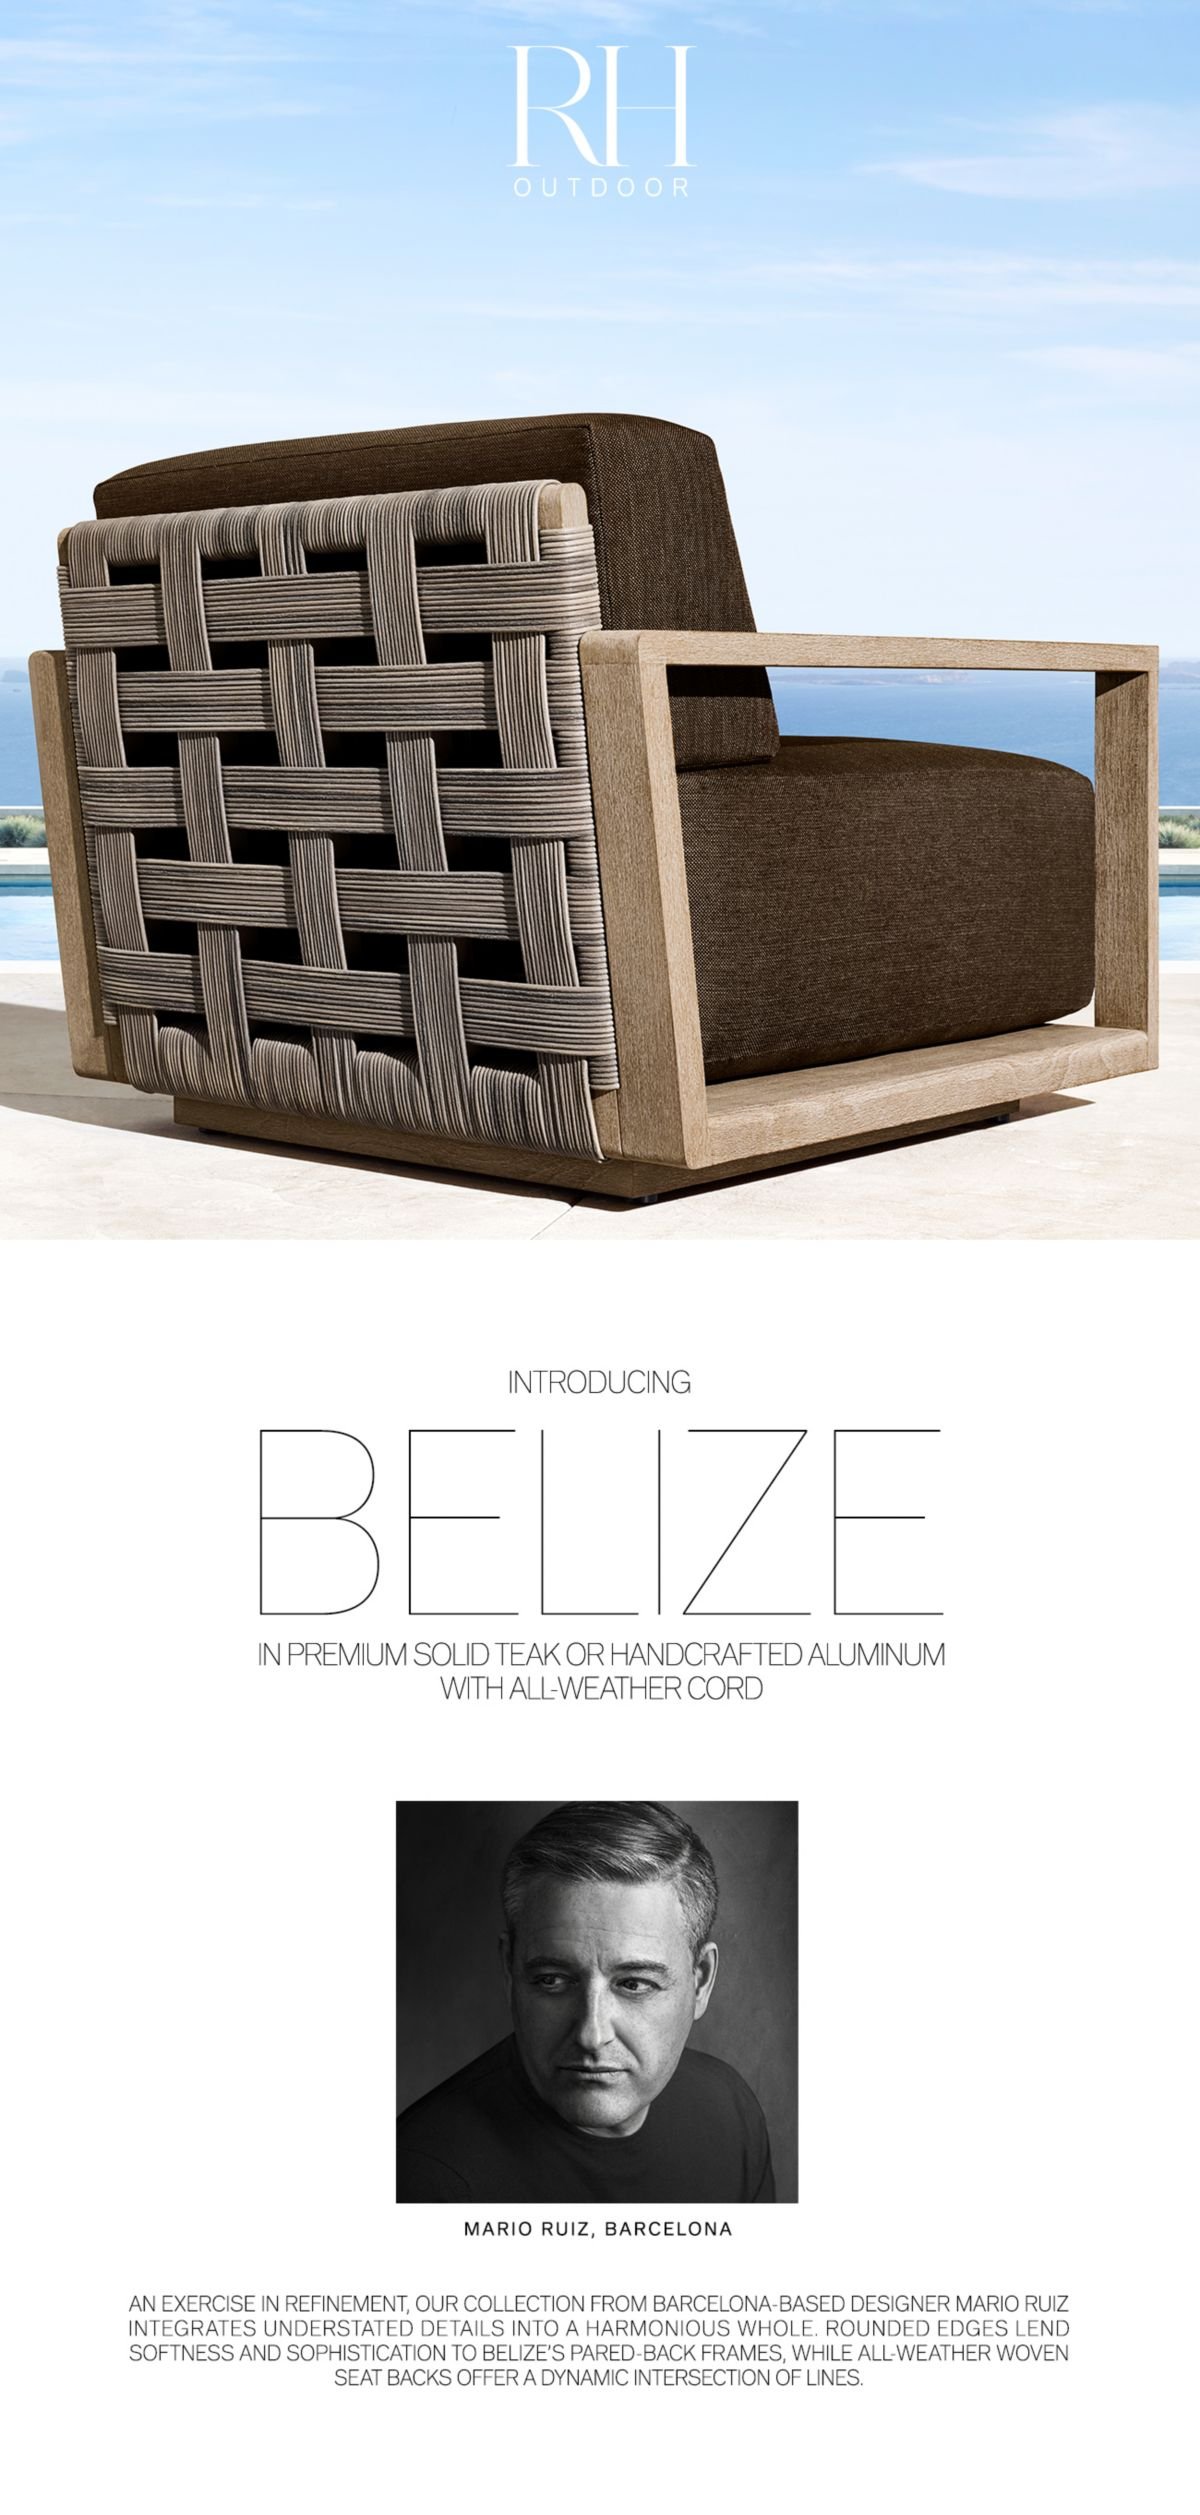 RH Outdoor. Introducing Belize in Premium Solid Teak or Handcrafted Aluminum with All-Weather Cord.